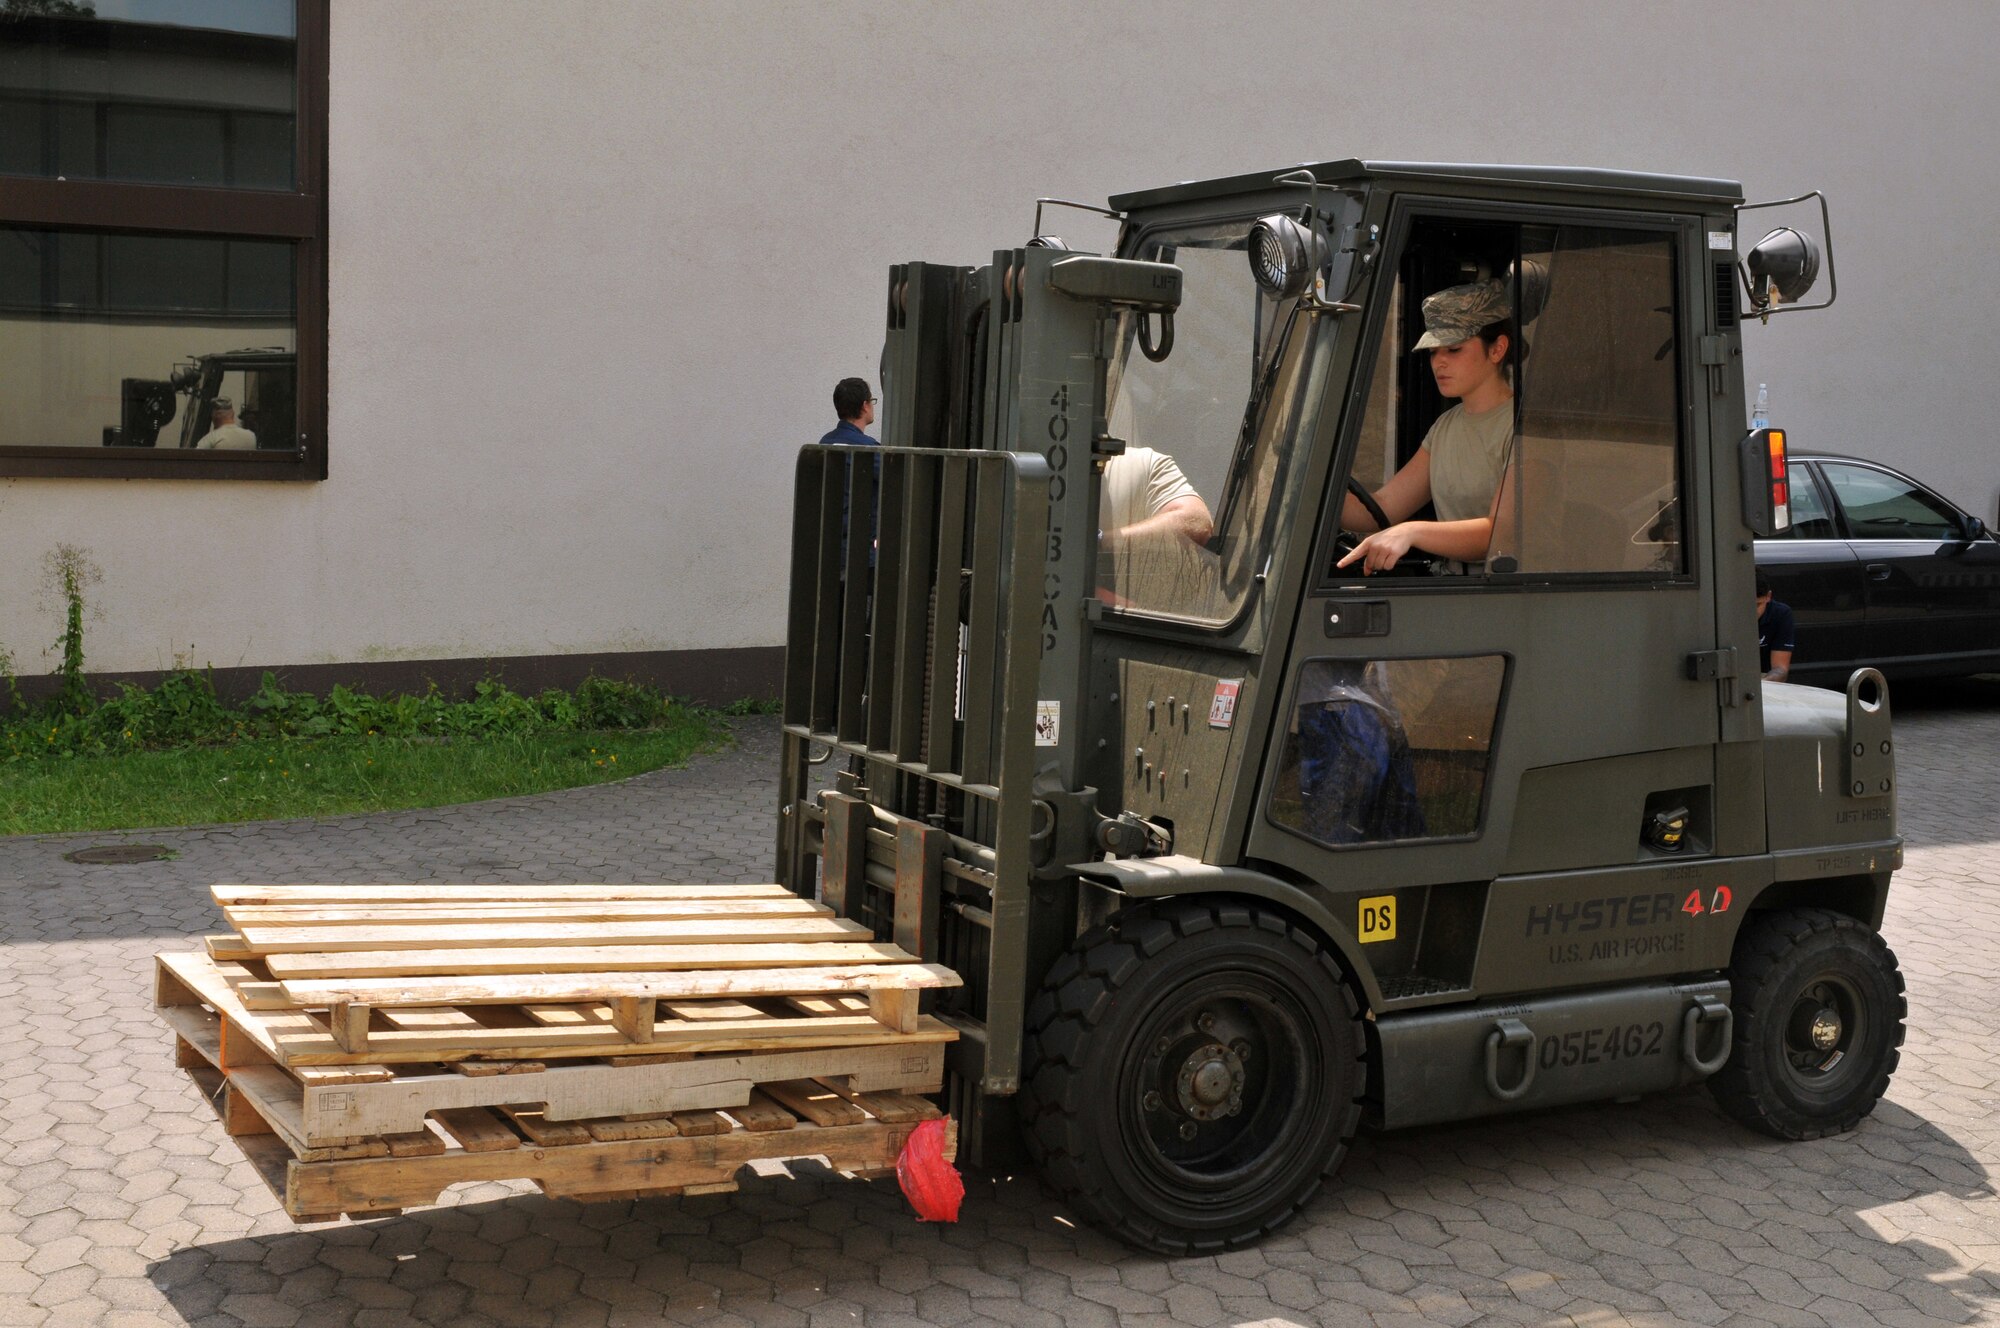 Senior Airman Maria Mammen with the Iowa Air National Guard’s 185th Air Refueling Wing’s Force Support Squadron demonstrates her skills operating a forklift during training at Ramstein Air Base, Germany in June, 2018. Several members of the unit were in German for training alongside their active duty counterparts. U.S. Air National Guard photo by Master Sgt. Bill Wiseman.